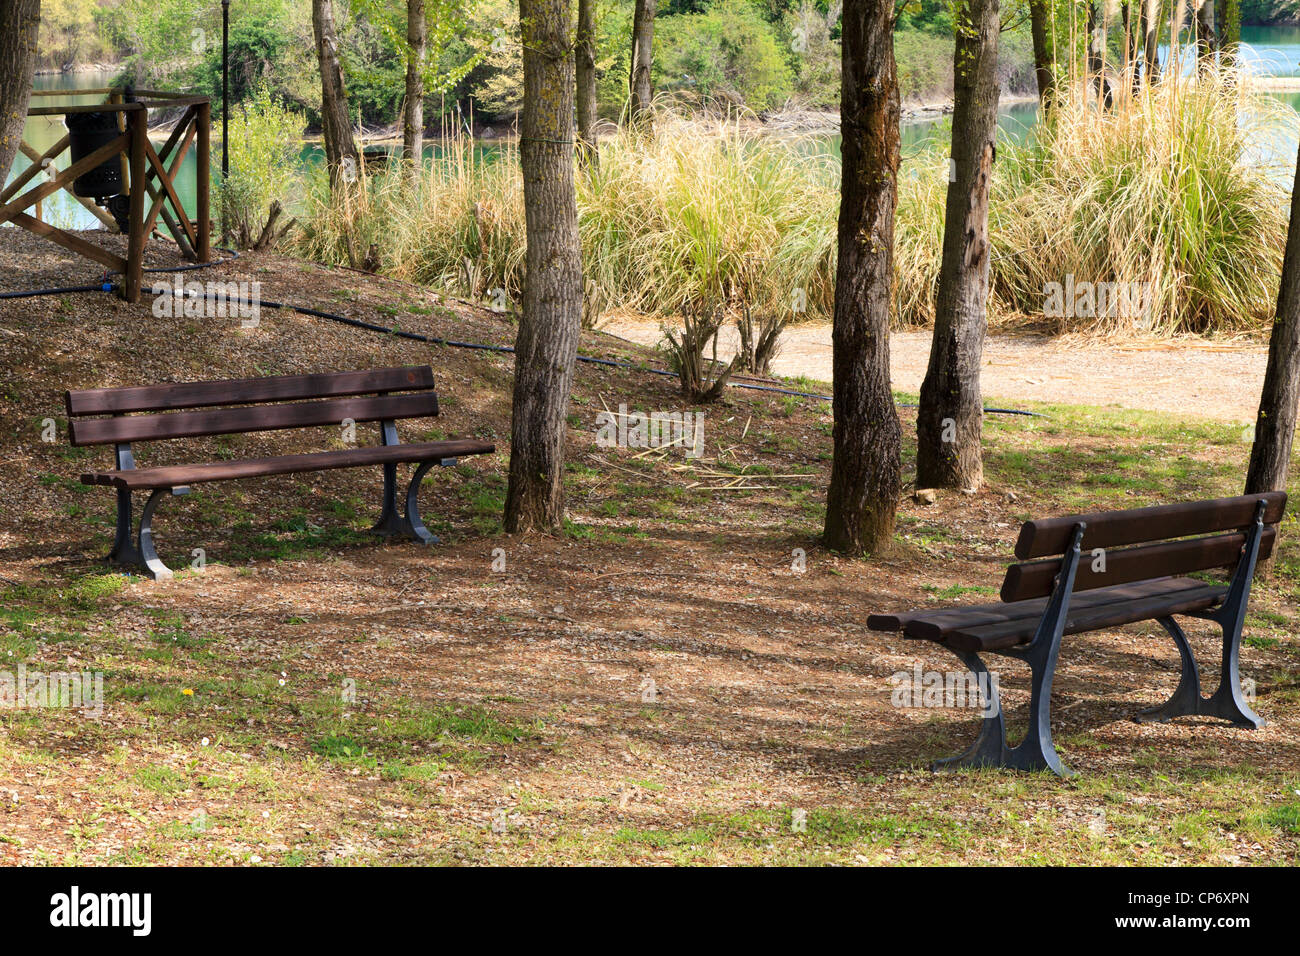 Benches for relaxing in the park Renai, Signa Stock Photo